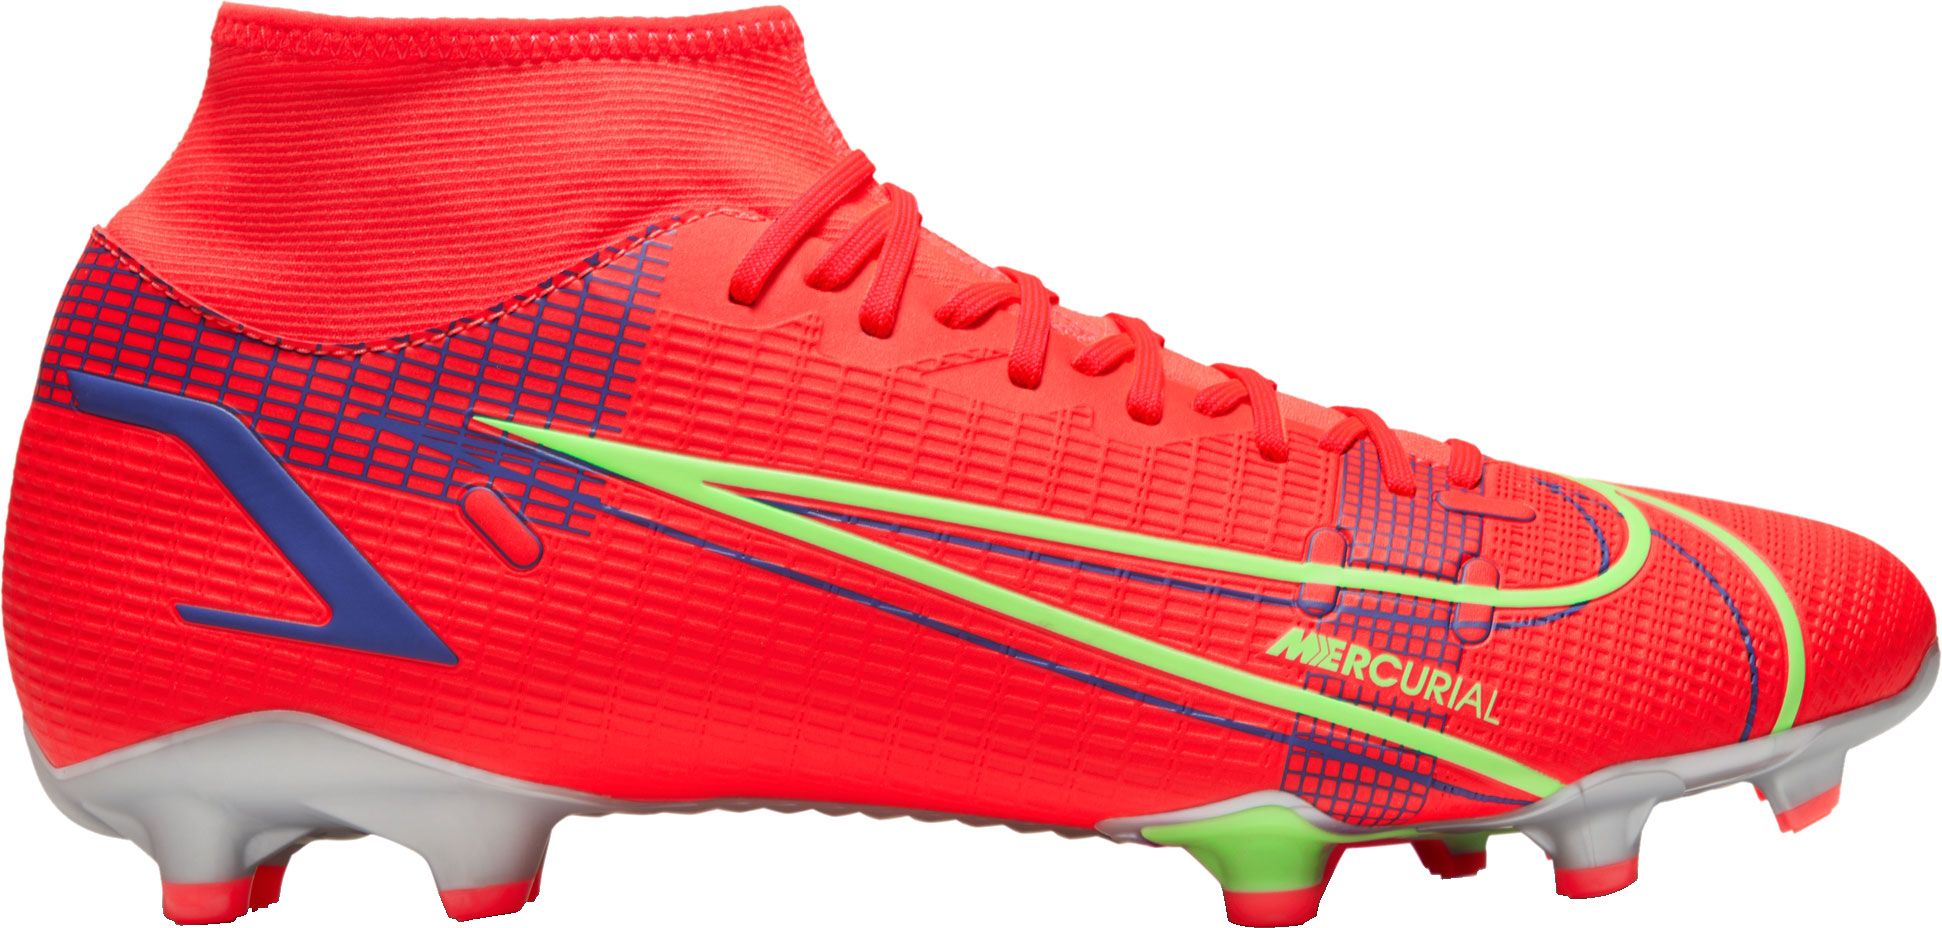 where to buy superfly cleats